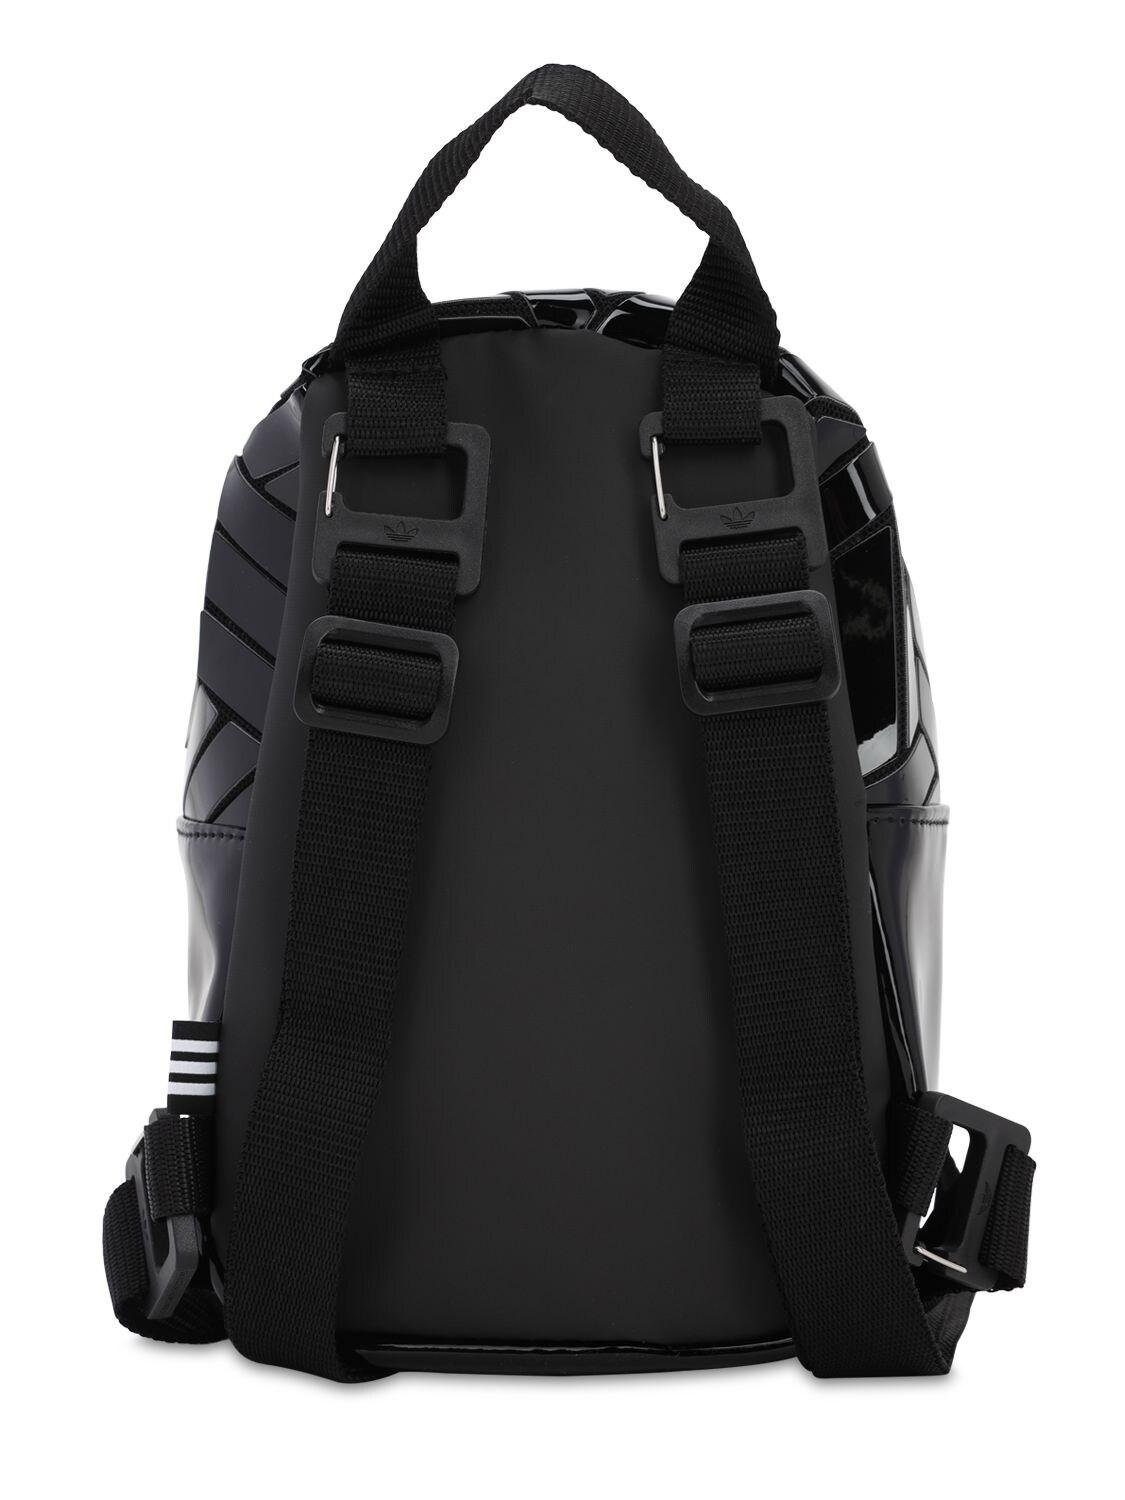 adidas Originals Mini Faux Patent Leather Backpack in Black | Lyst